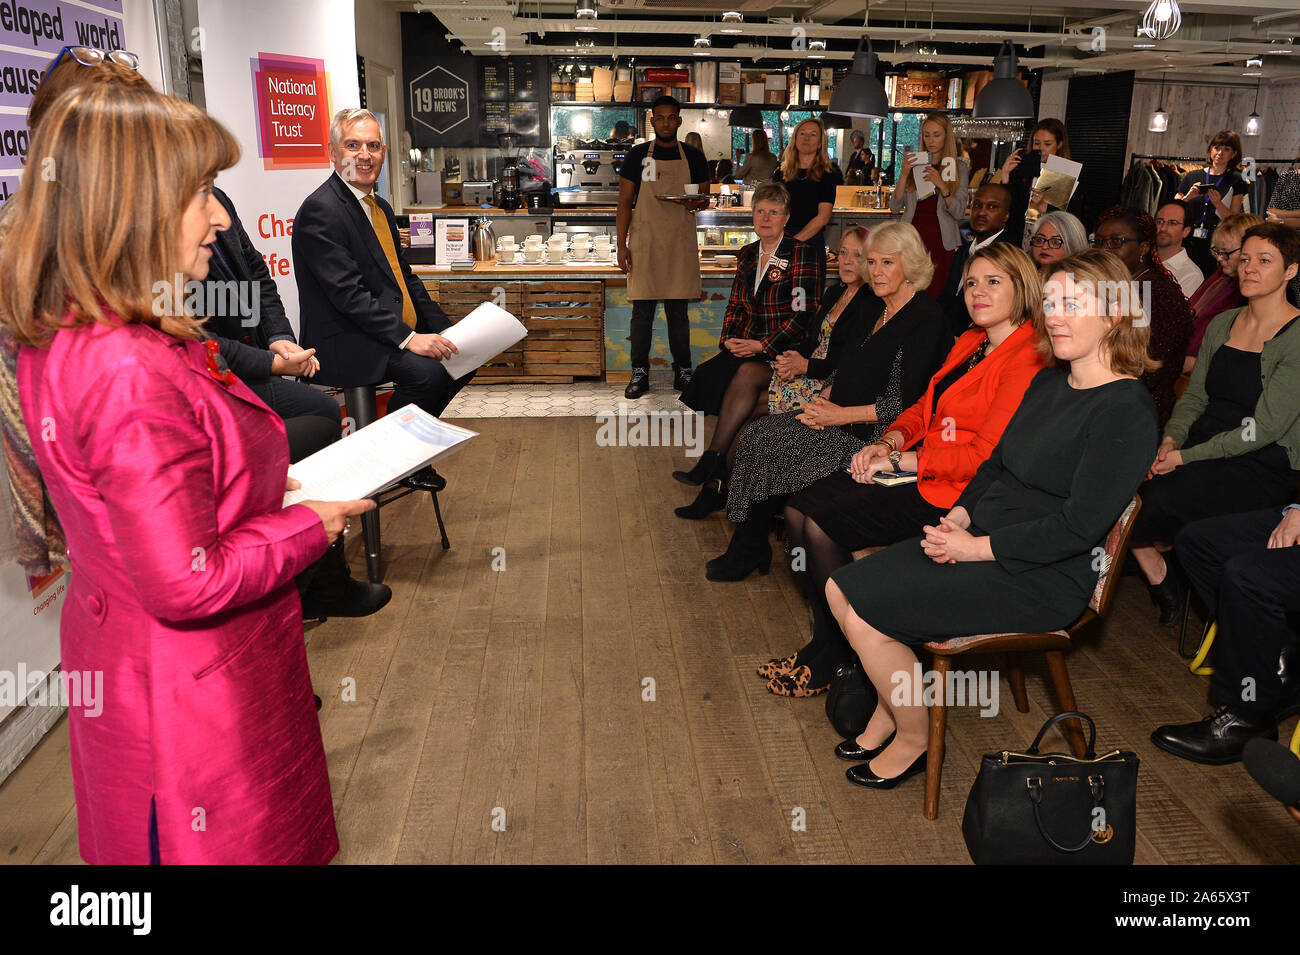 The Duchess of Cornwall during a tea reception at KPMG's Mayfair Cafe to mark the 7th anniversary of the National Literacy Trust's Books Unlocked programme which provides free copies of Booker Prize shortlisted titles to people in prison library groups to read, discuss and keep. PA Photo. Picture date: Thursday October 24, 2019. See PA story ROYAL Camilla. Photo credit should read: Jeff Spicer/PA Wire Stock Photo